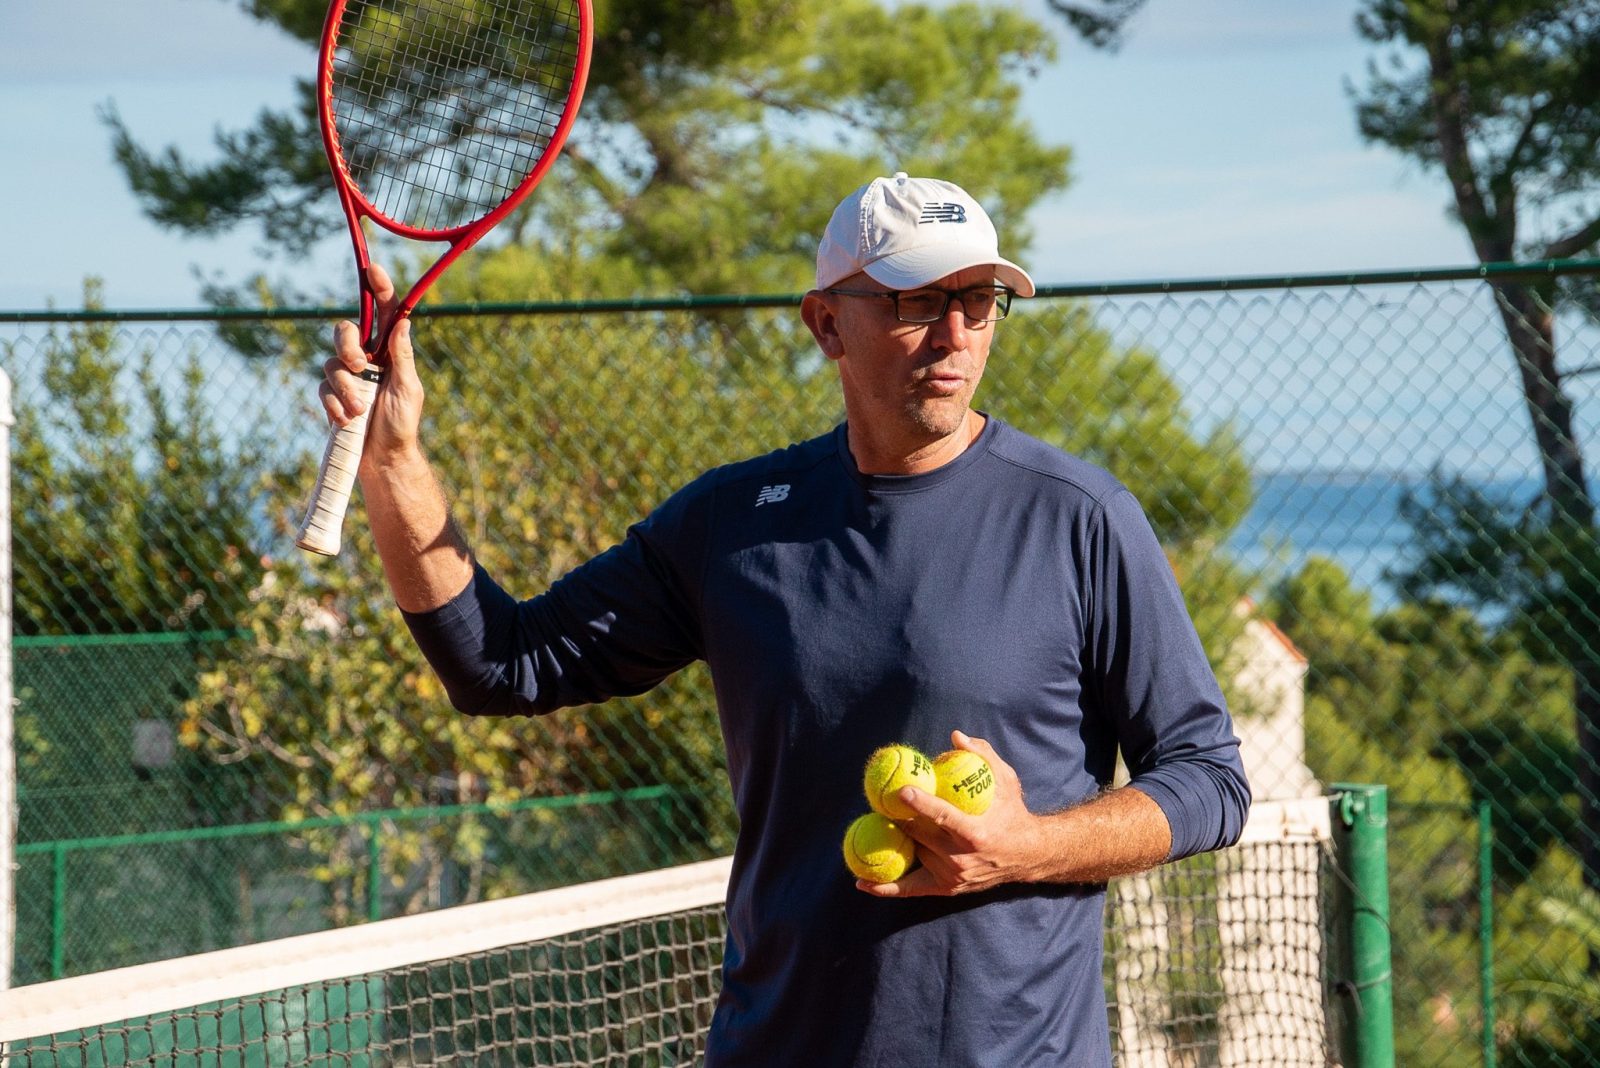 Tennis coach on the court with racket and a balls